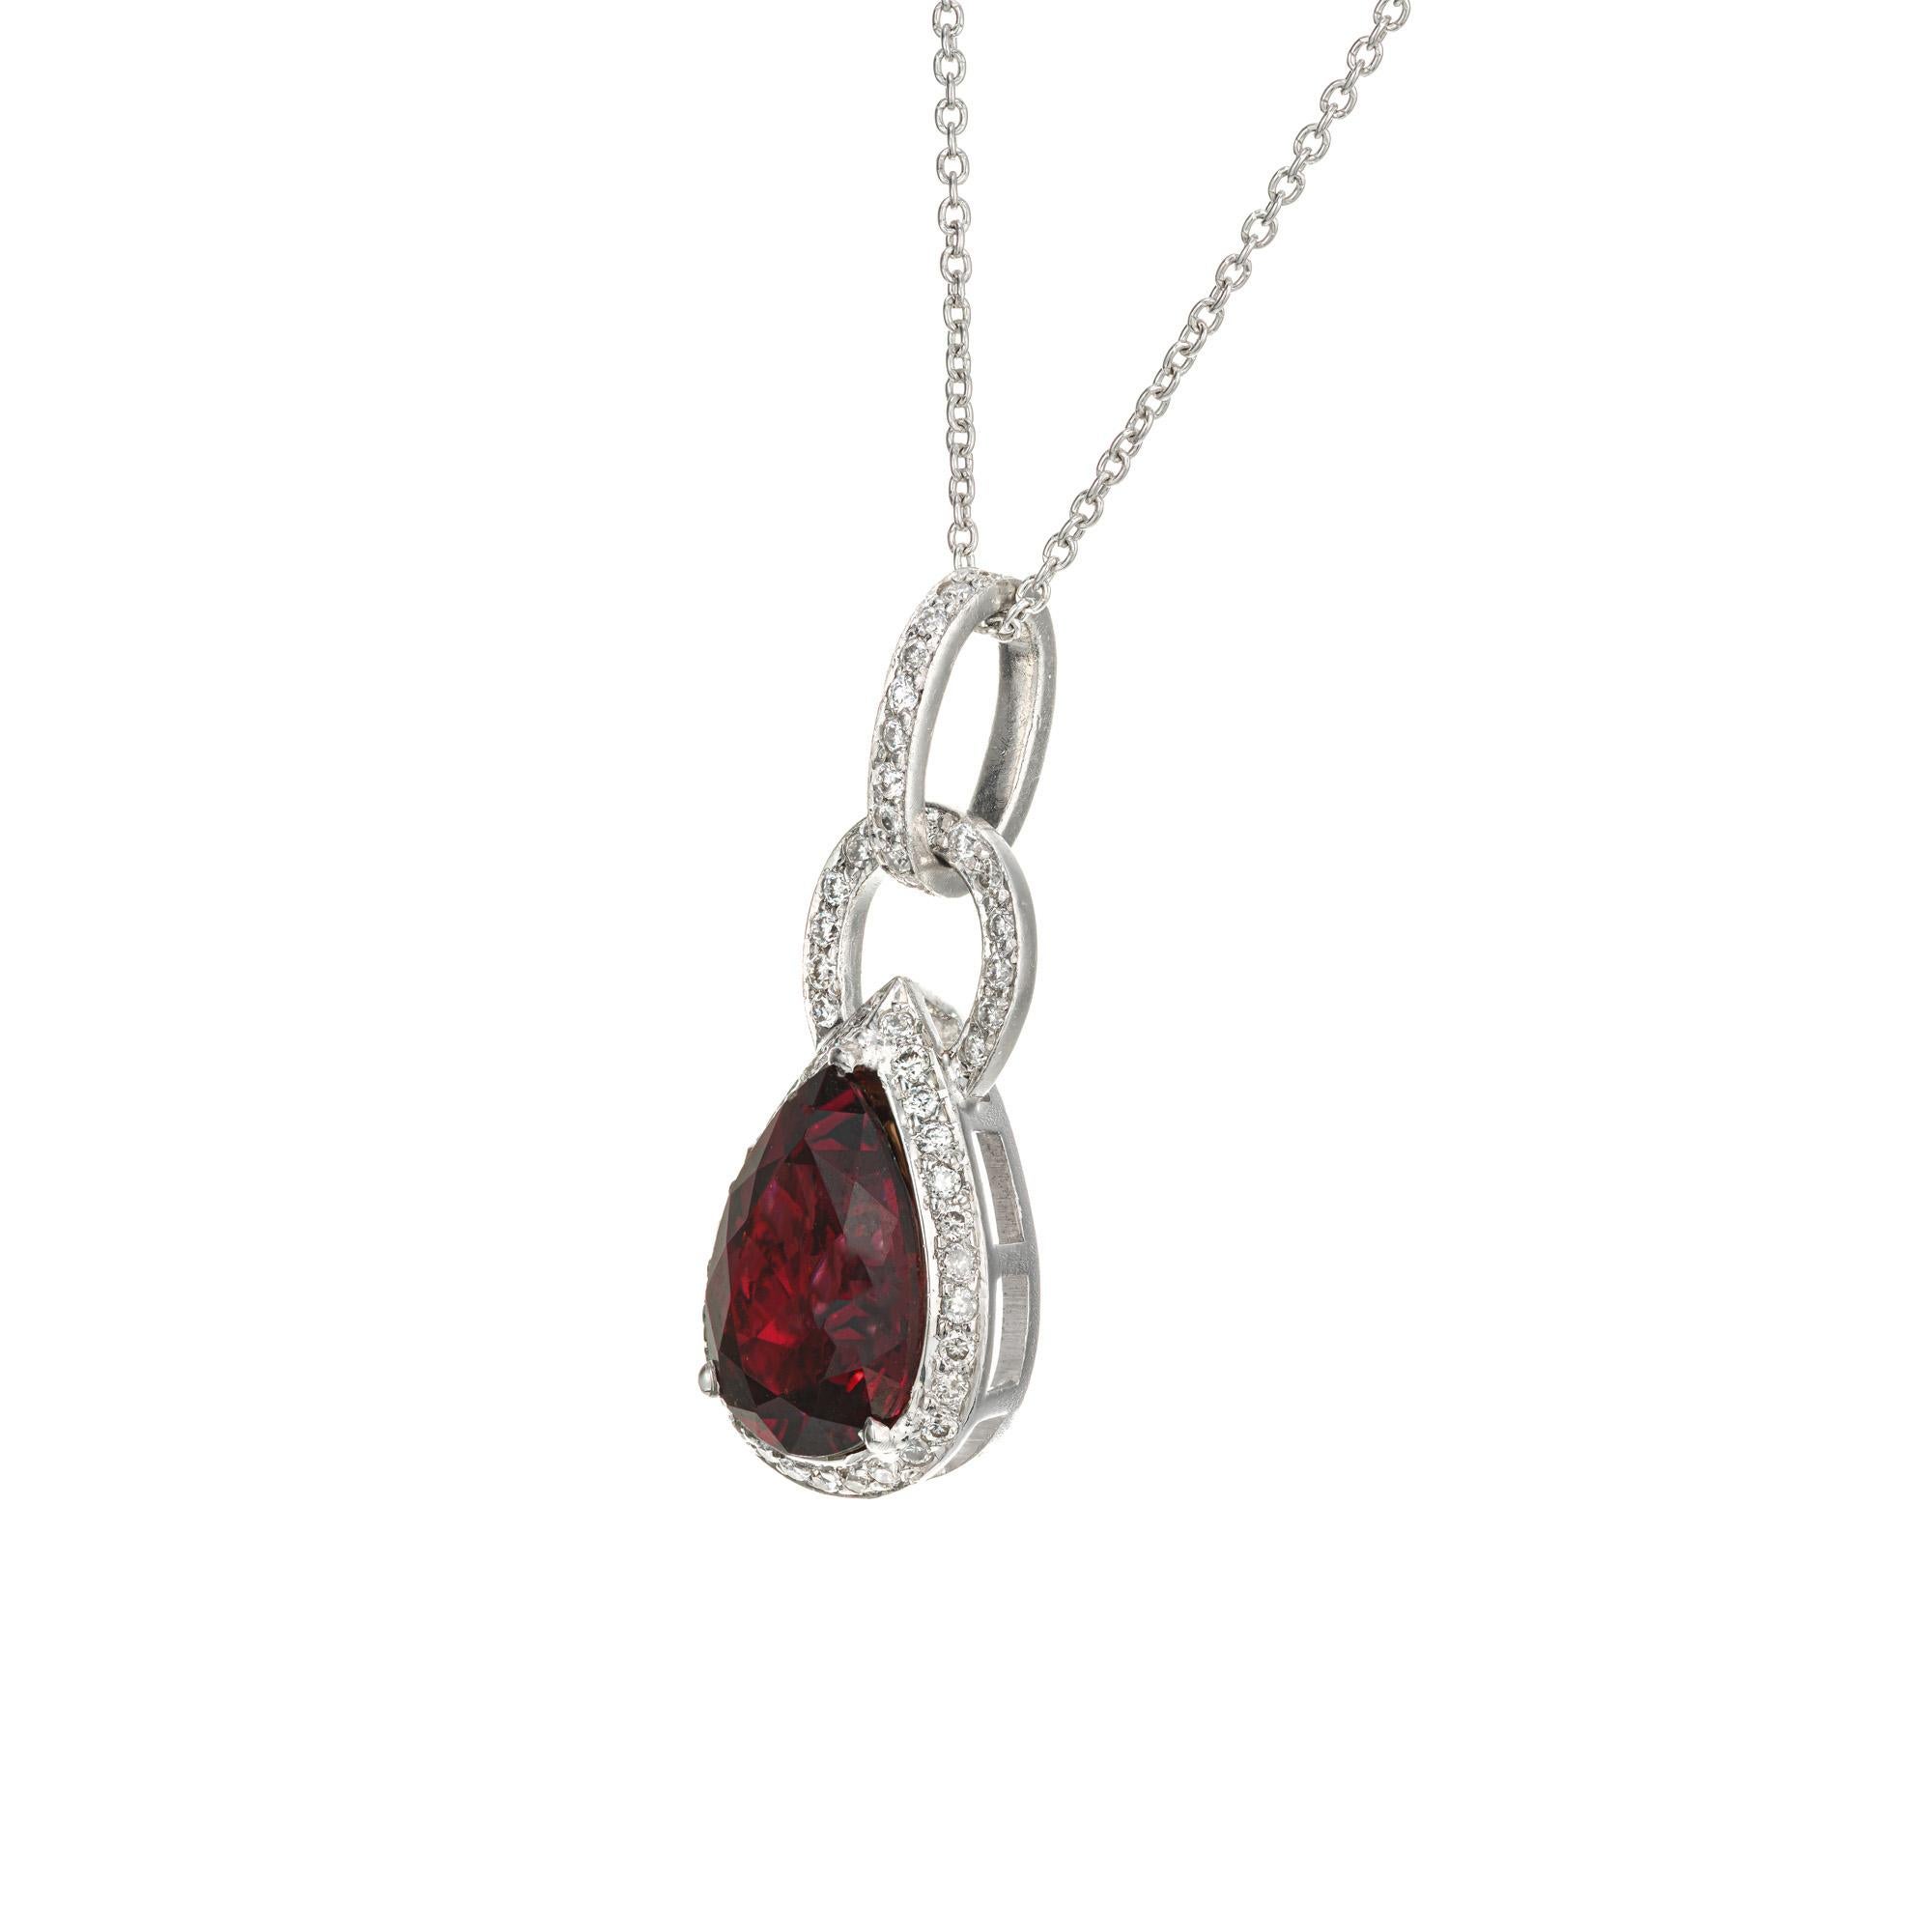 Rhodolite and diamond halo pendant necklace. Pear shaped Rhodolite red garnet with a halo of 54 round full cut diamonds set in platinum. 17 inch platinum chain. 

1 Pear shaped Rhodolite red Garnet 10 x 7mm, approx. total weight 1.80ct
54 round full